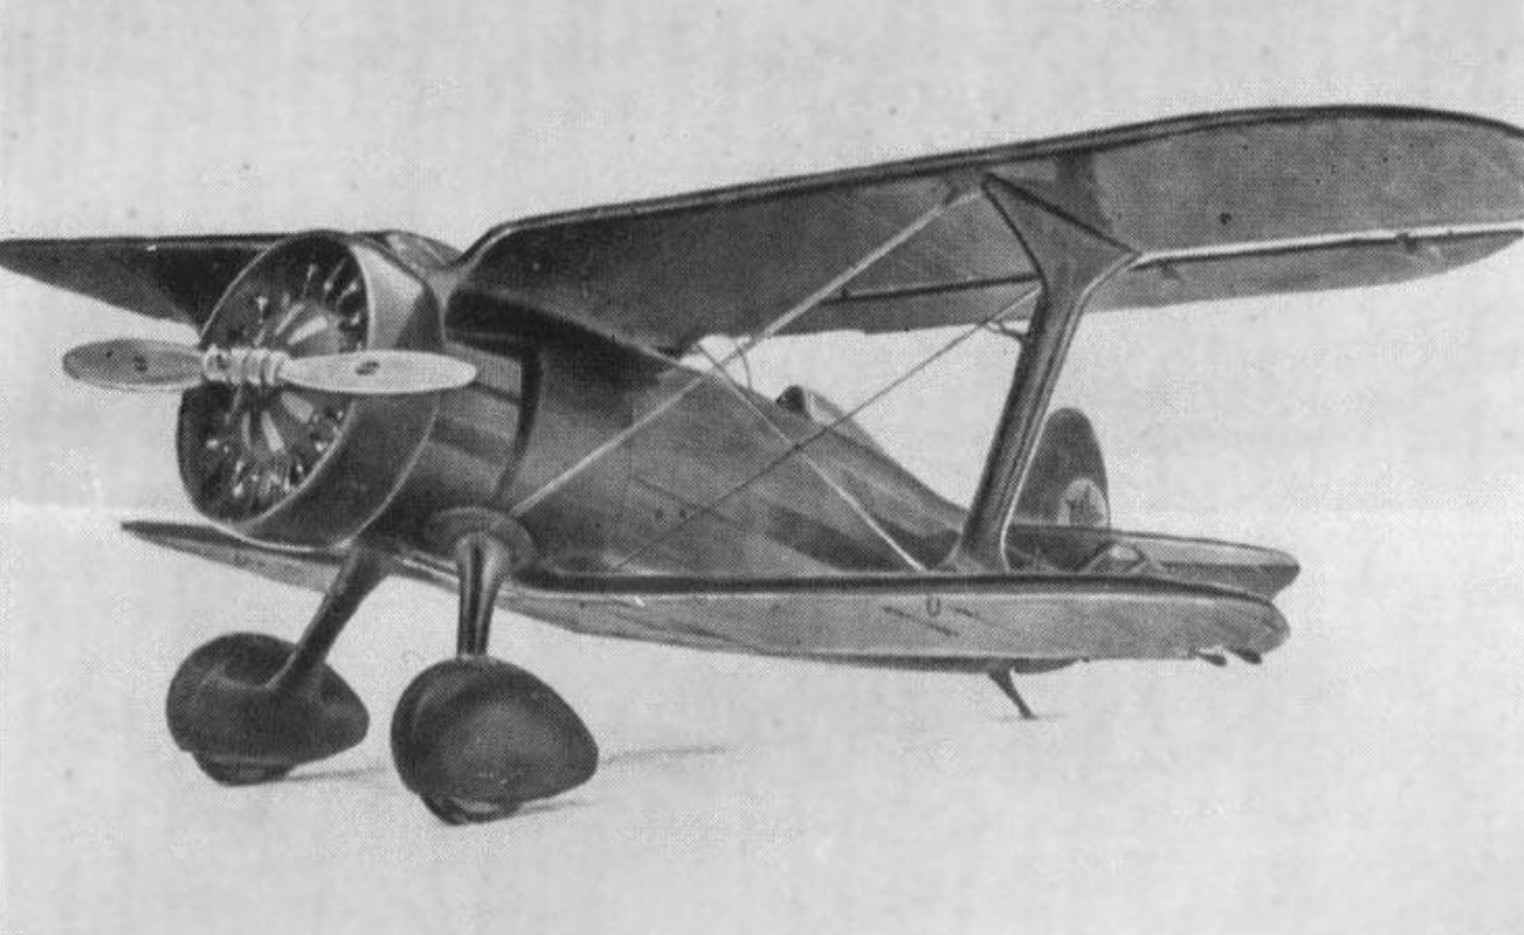 THE FIGHTER I-15